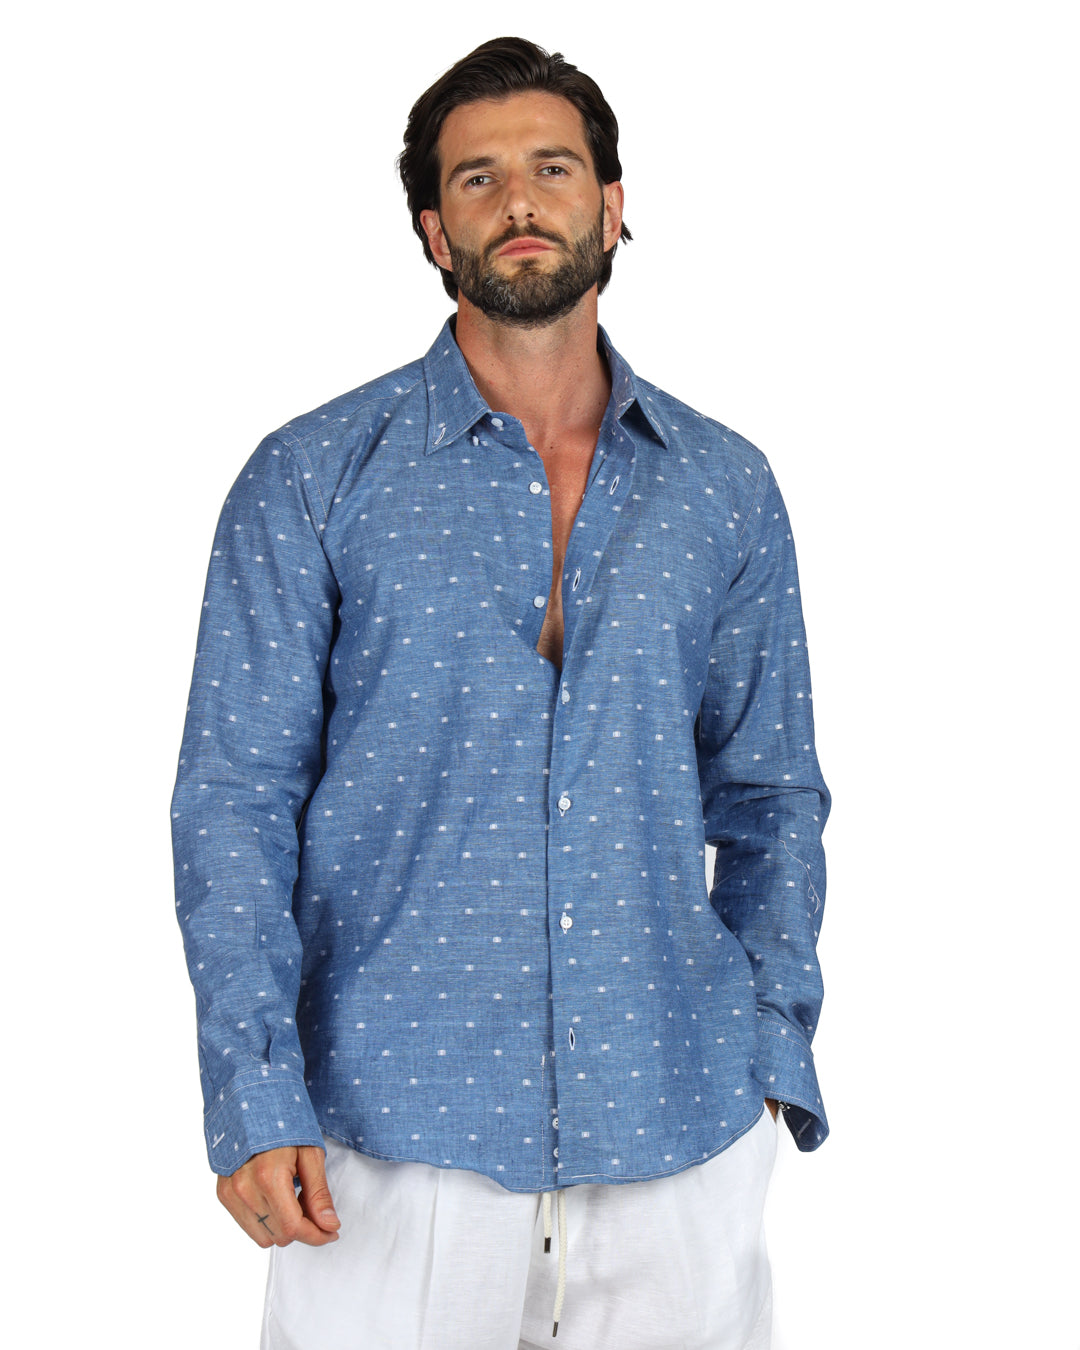 Salina - Classic denim shirt with white linen embroidery